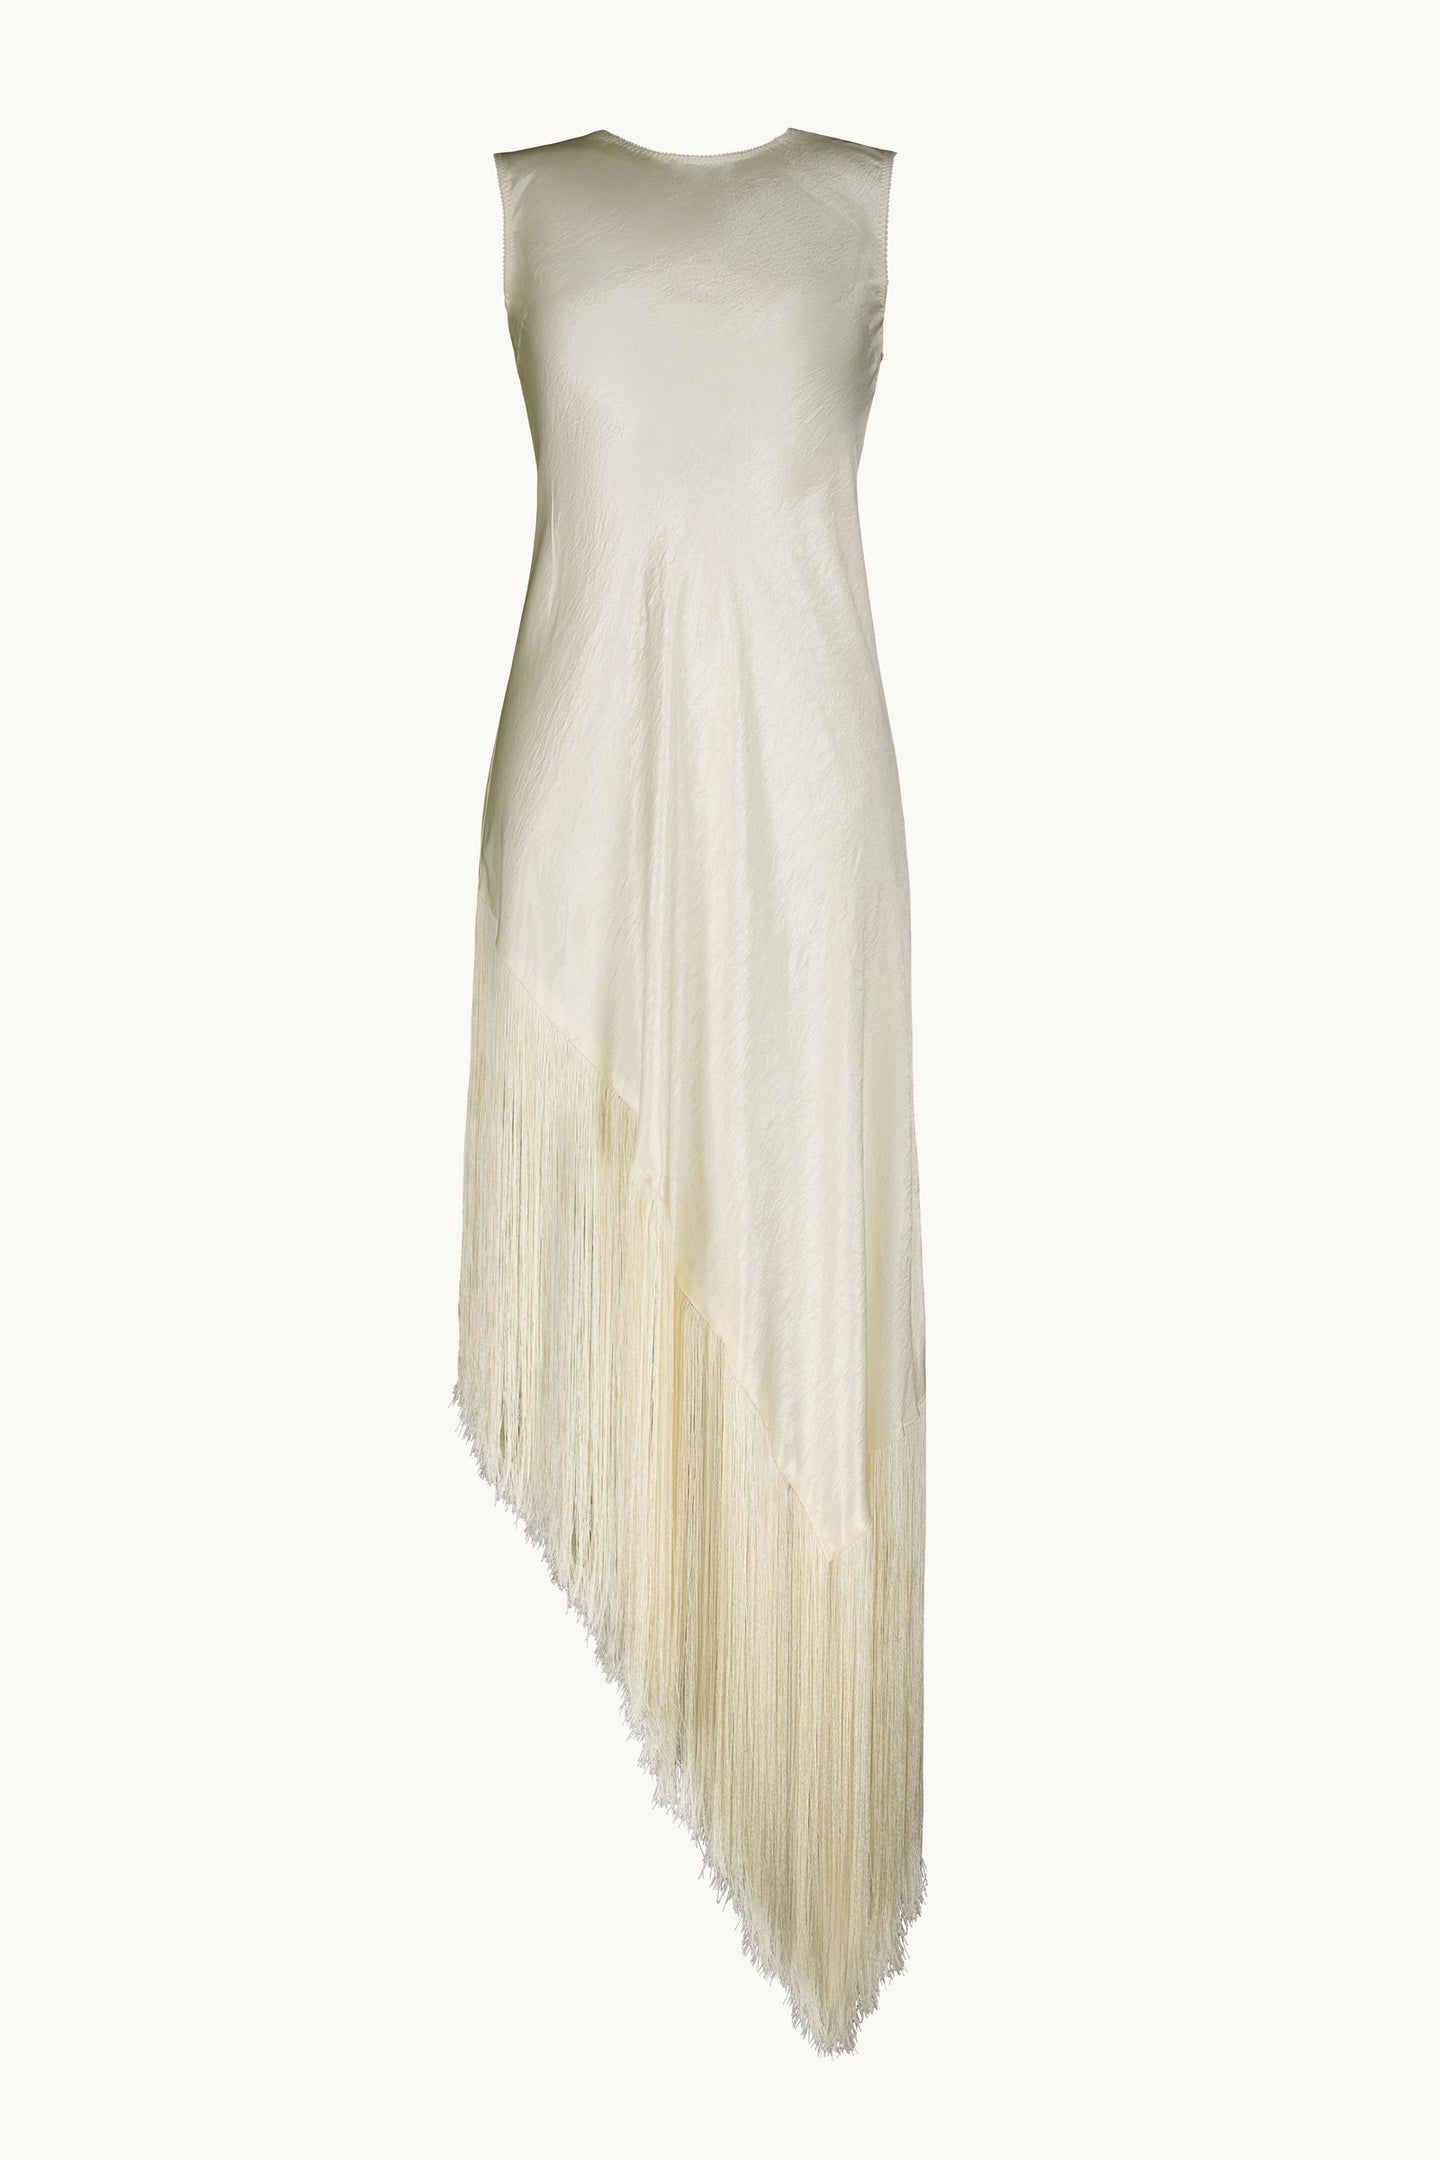 Whispering Angel ivory dress front view